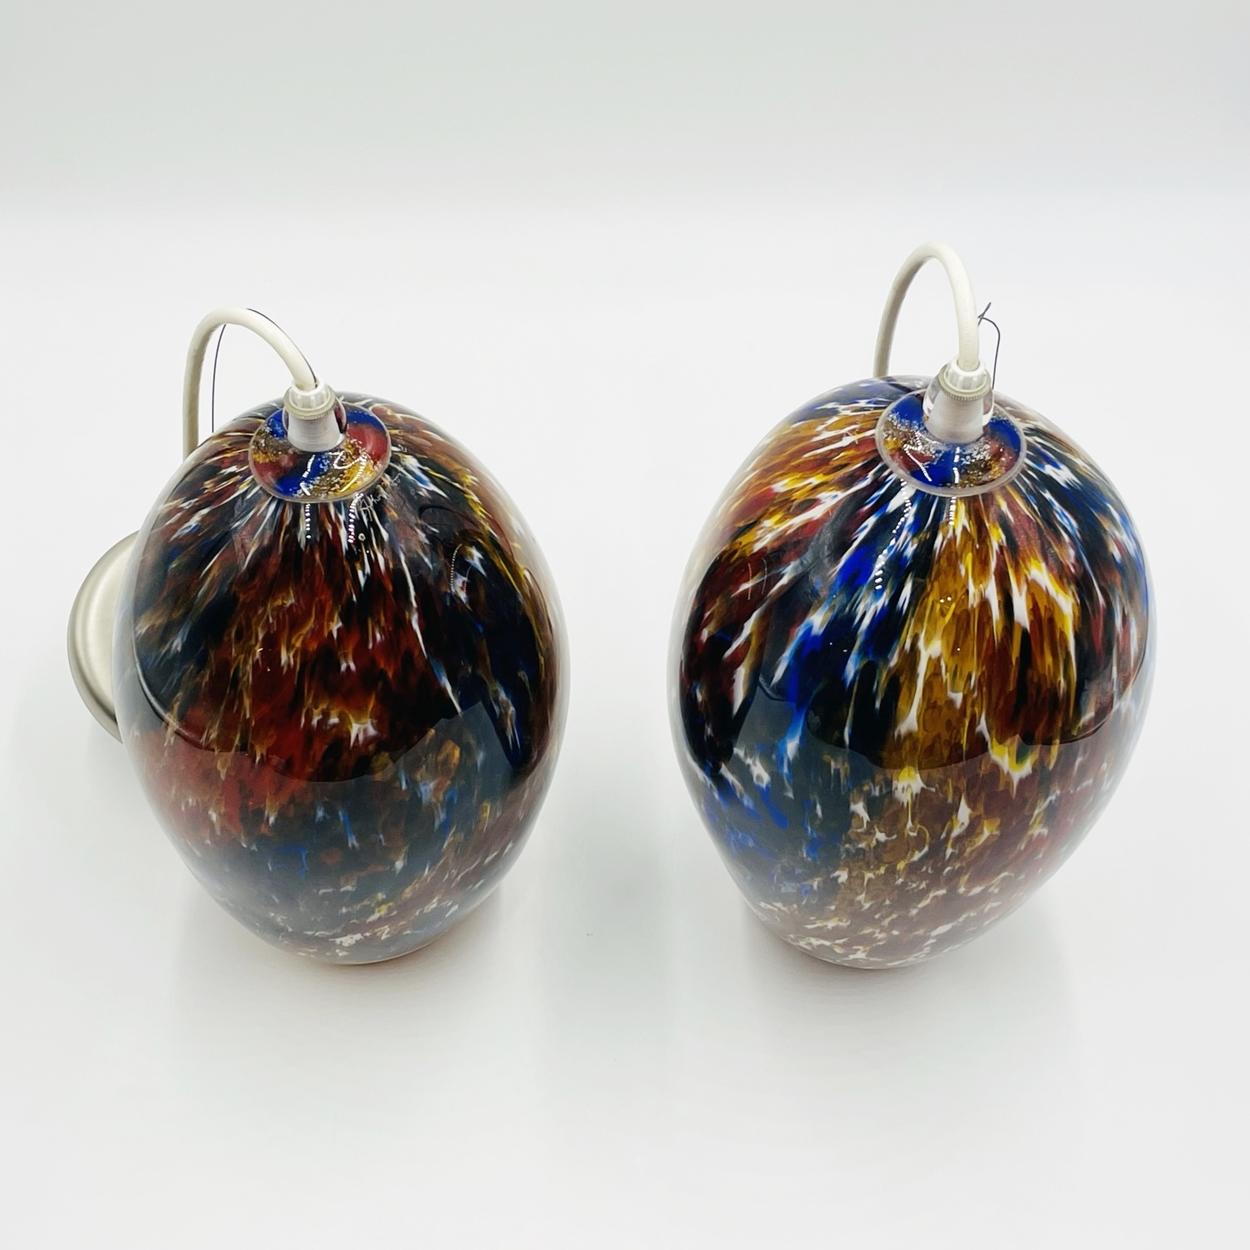 Beautiful pair of Murano glass style art glass pendant lights signed and dated 2012.

The pieces are very colorful and vibrant, they have a beautiful ovoid shape.

Measurements:
Smaller pendant:
Glass body only 13 high x 26.50 high to top of